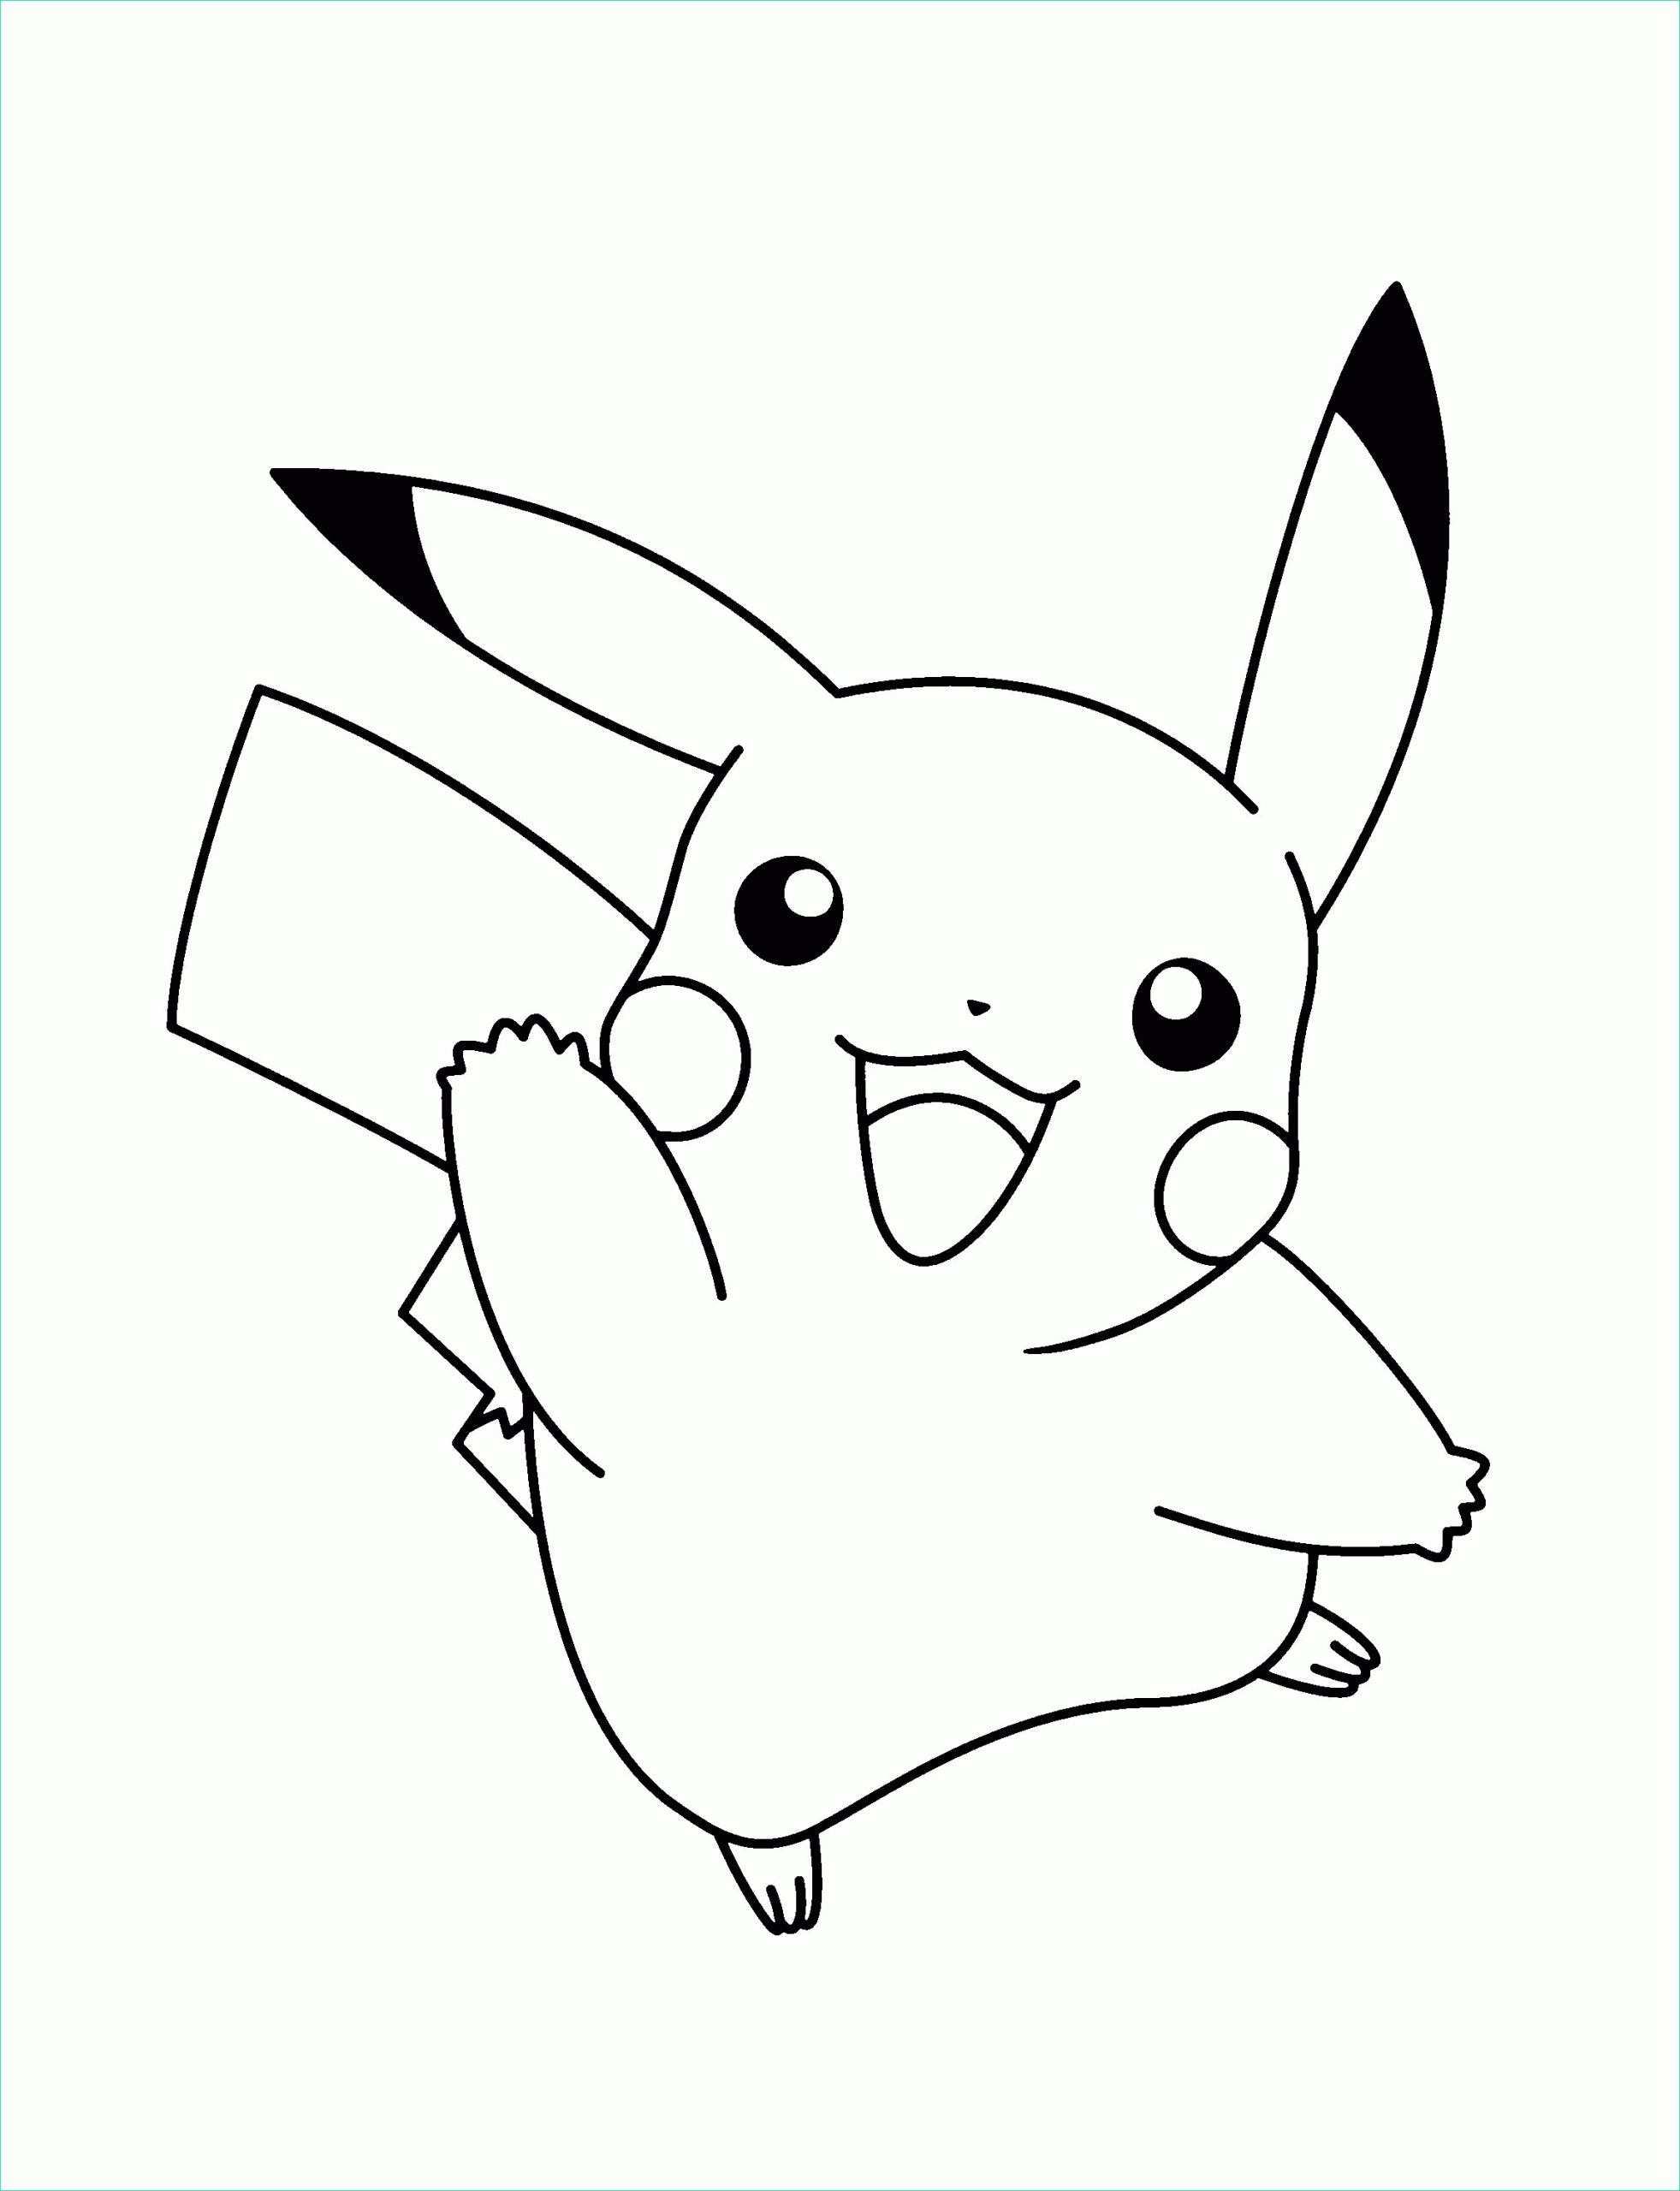 Coloriage Picachu Impressionnant Collection Coloriage Pikachu à Imprimer Sur Coloriages Fo